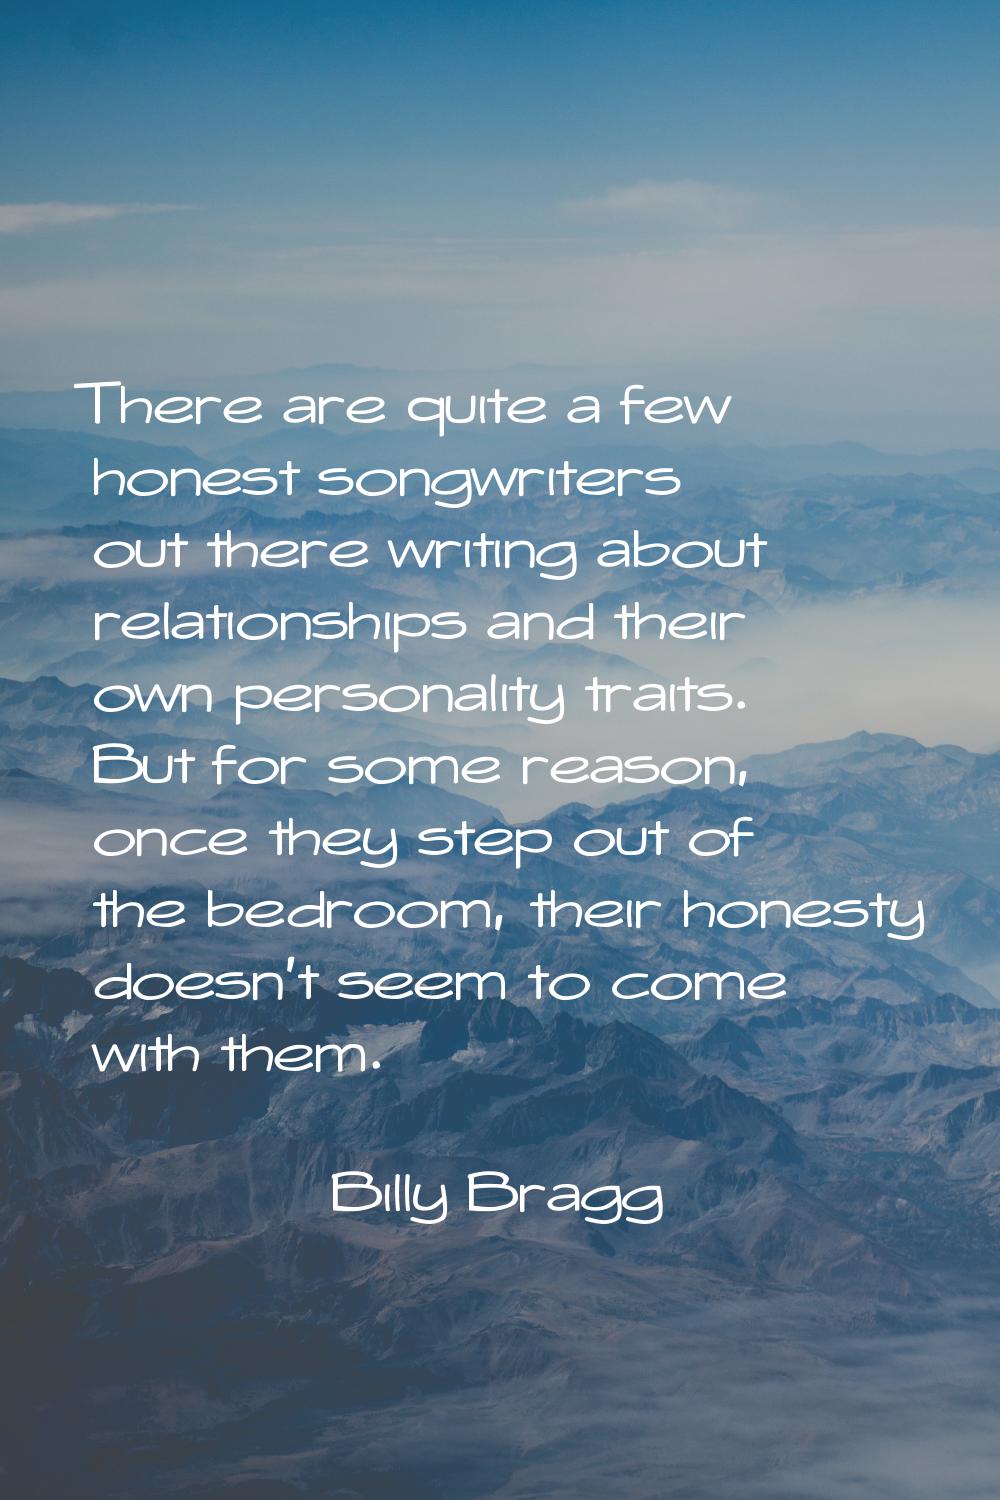 There are quite a few honest songwriters out there writing about relationships and their own person